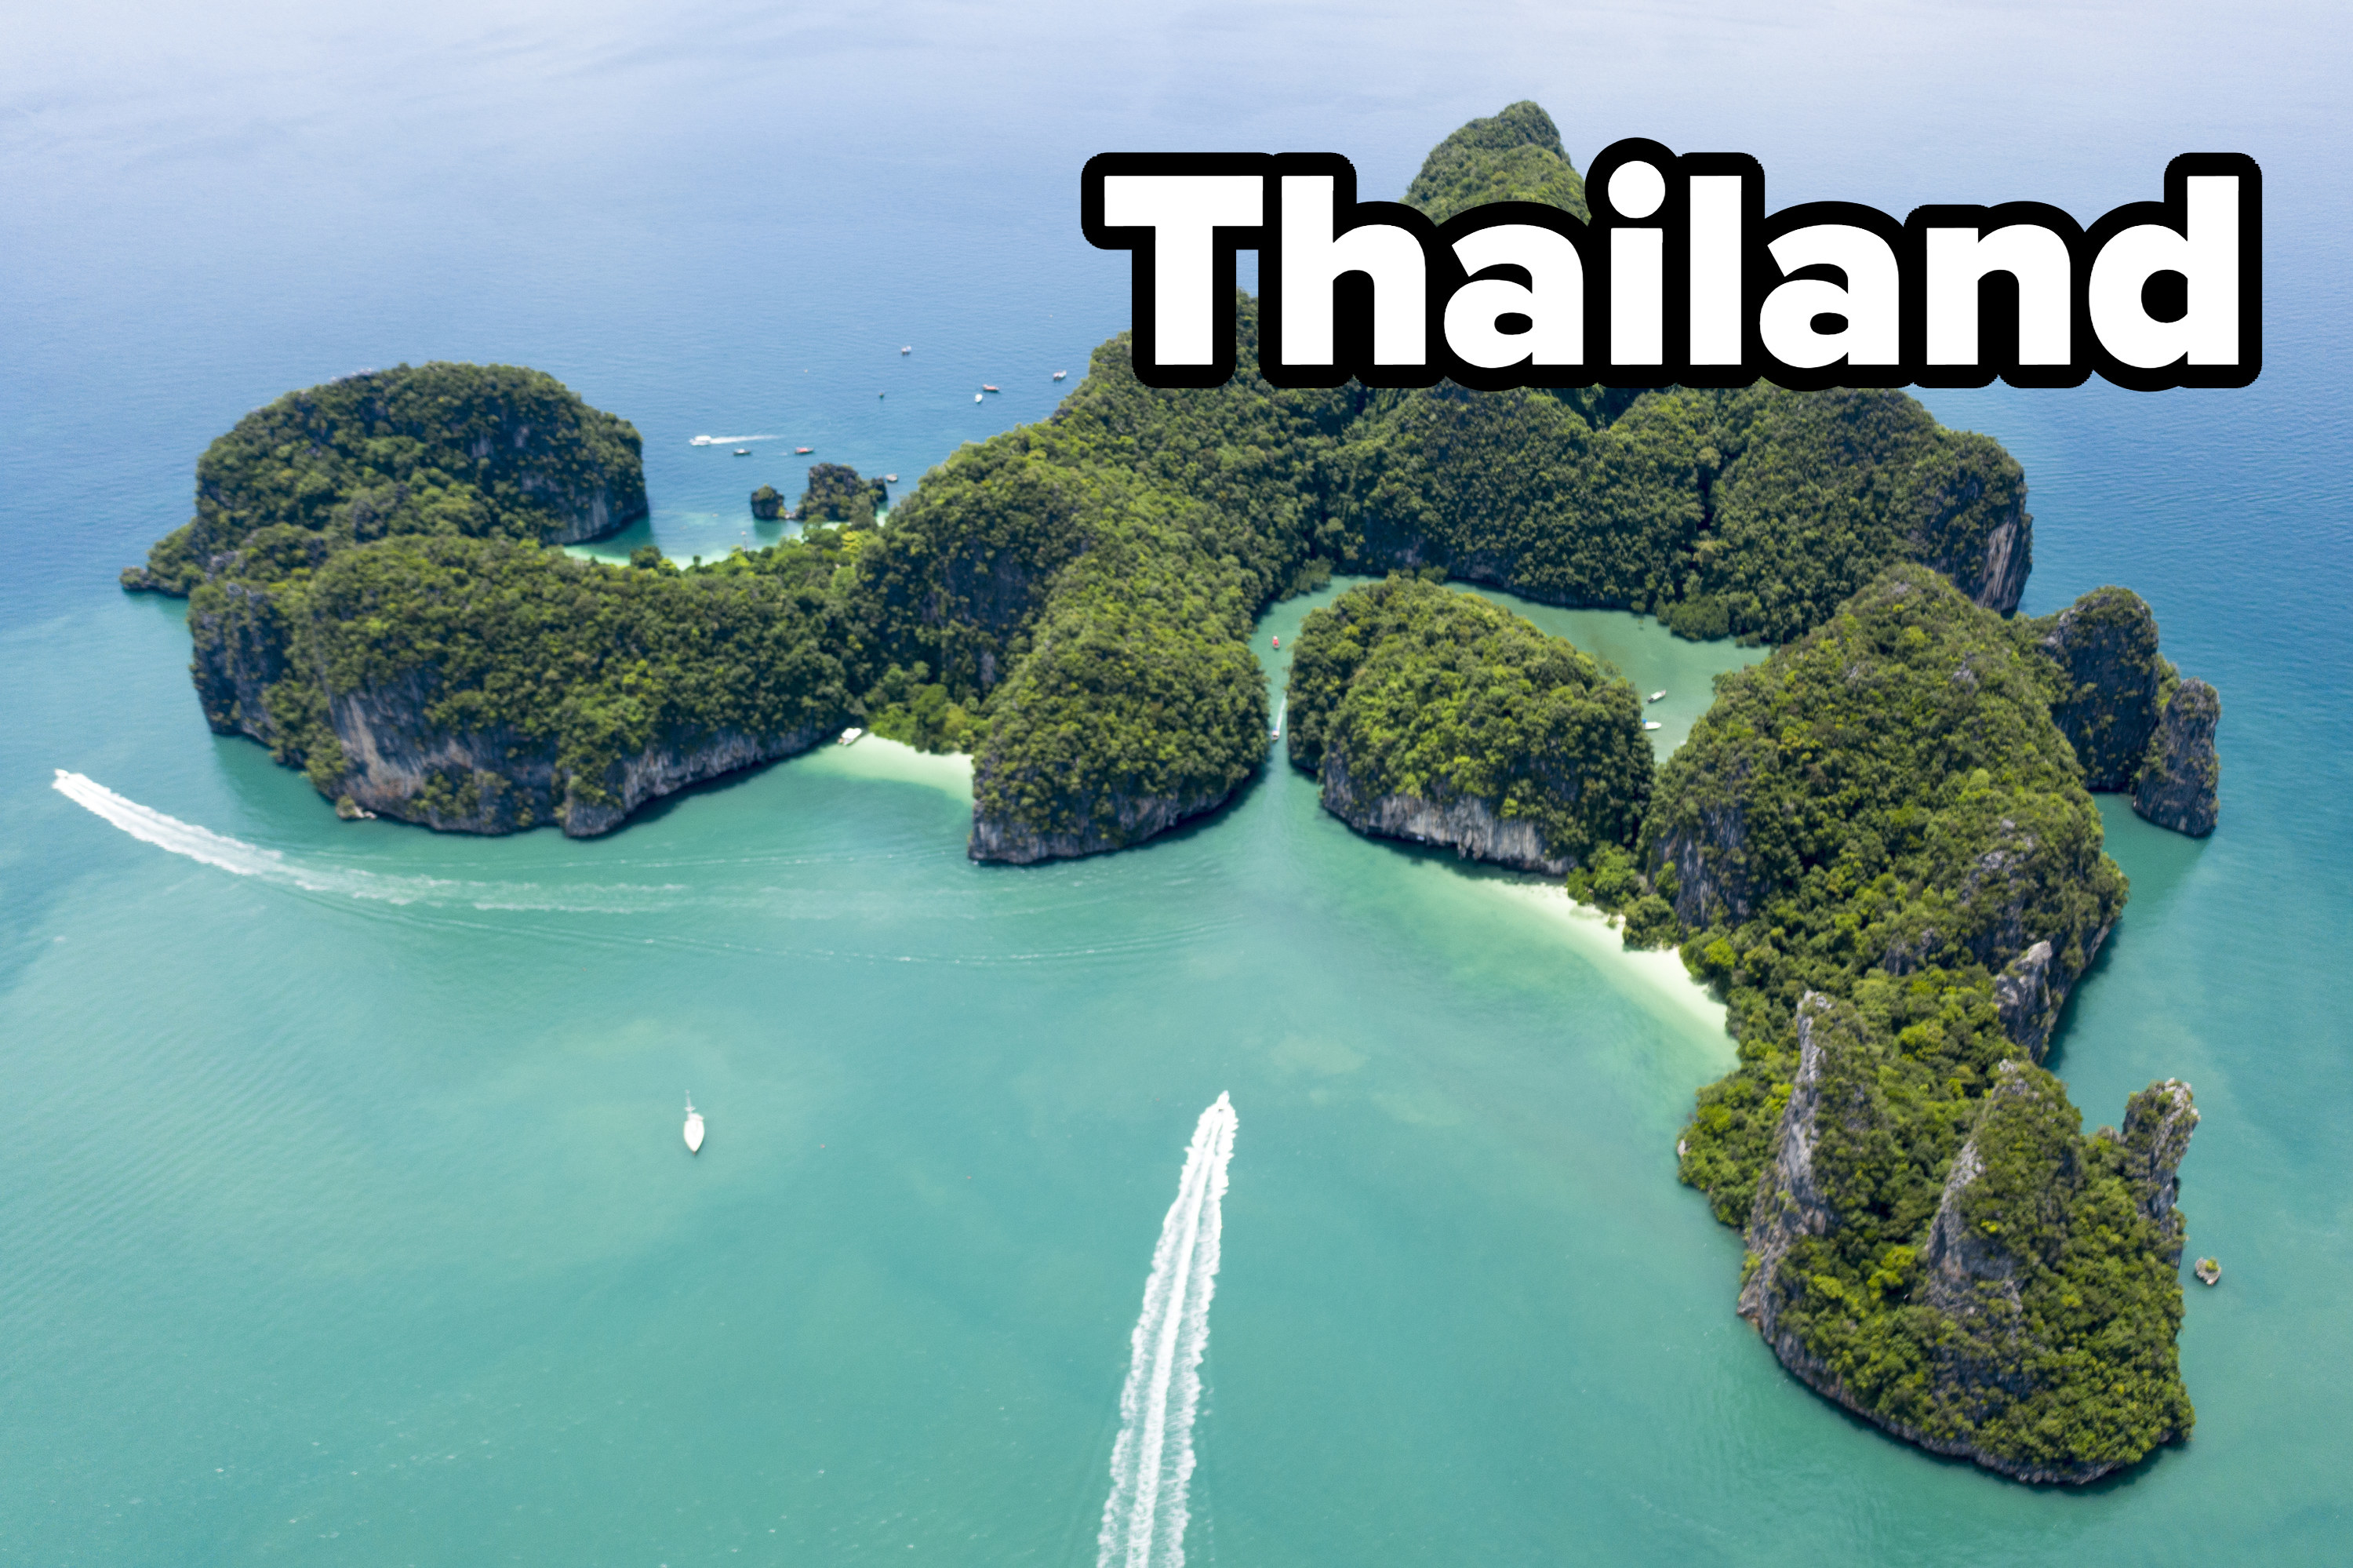 A collection of small island in Thailand with tall tree covered rock formations, white sand beaches, and clear blue ocean waters.